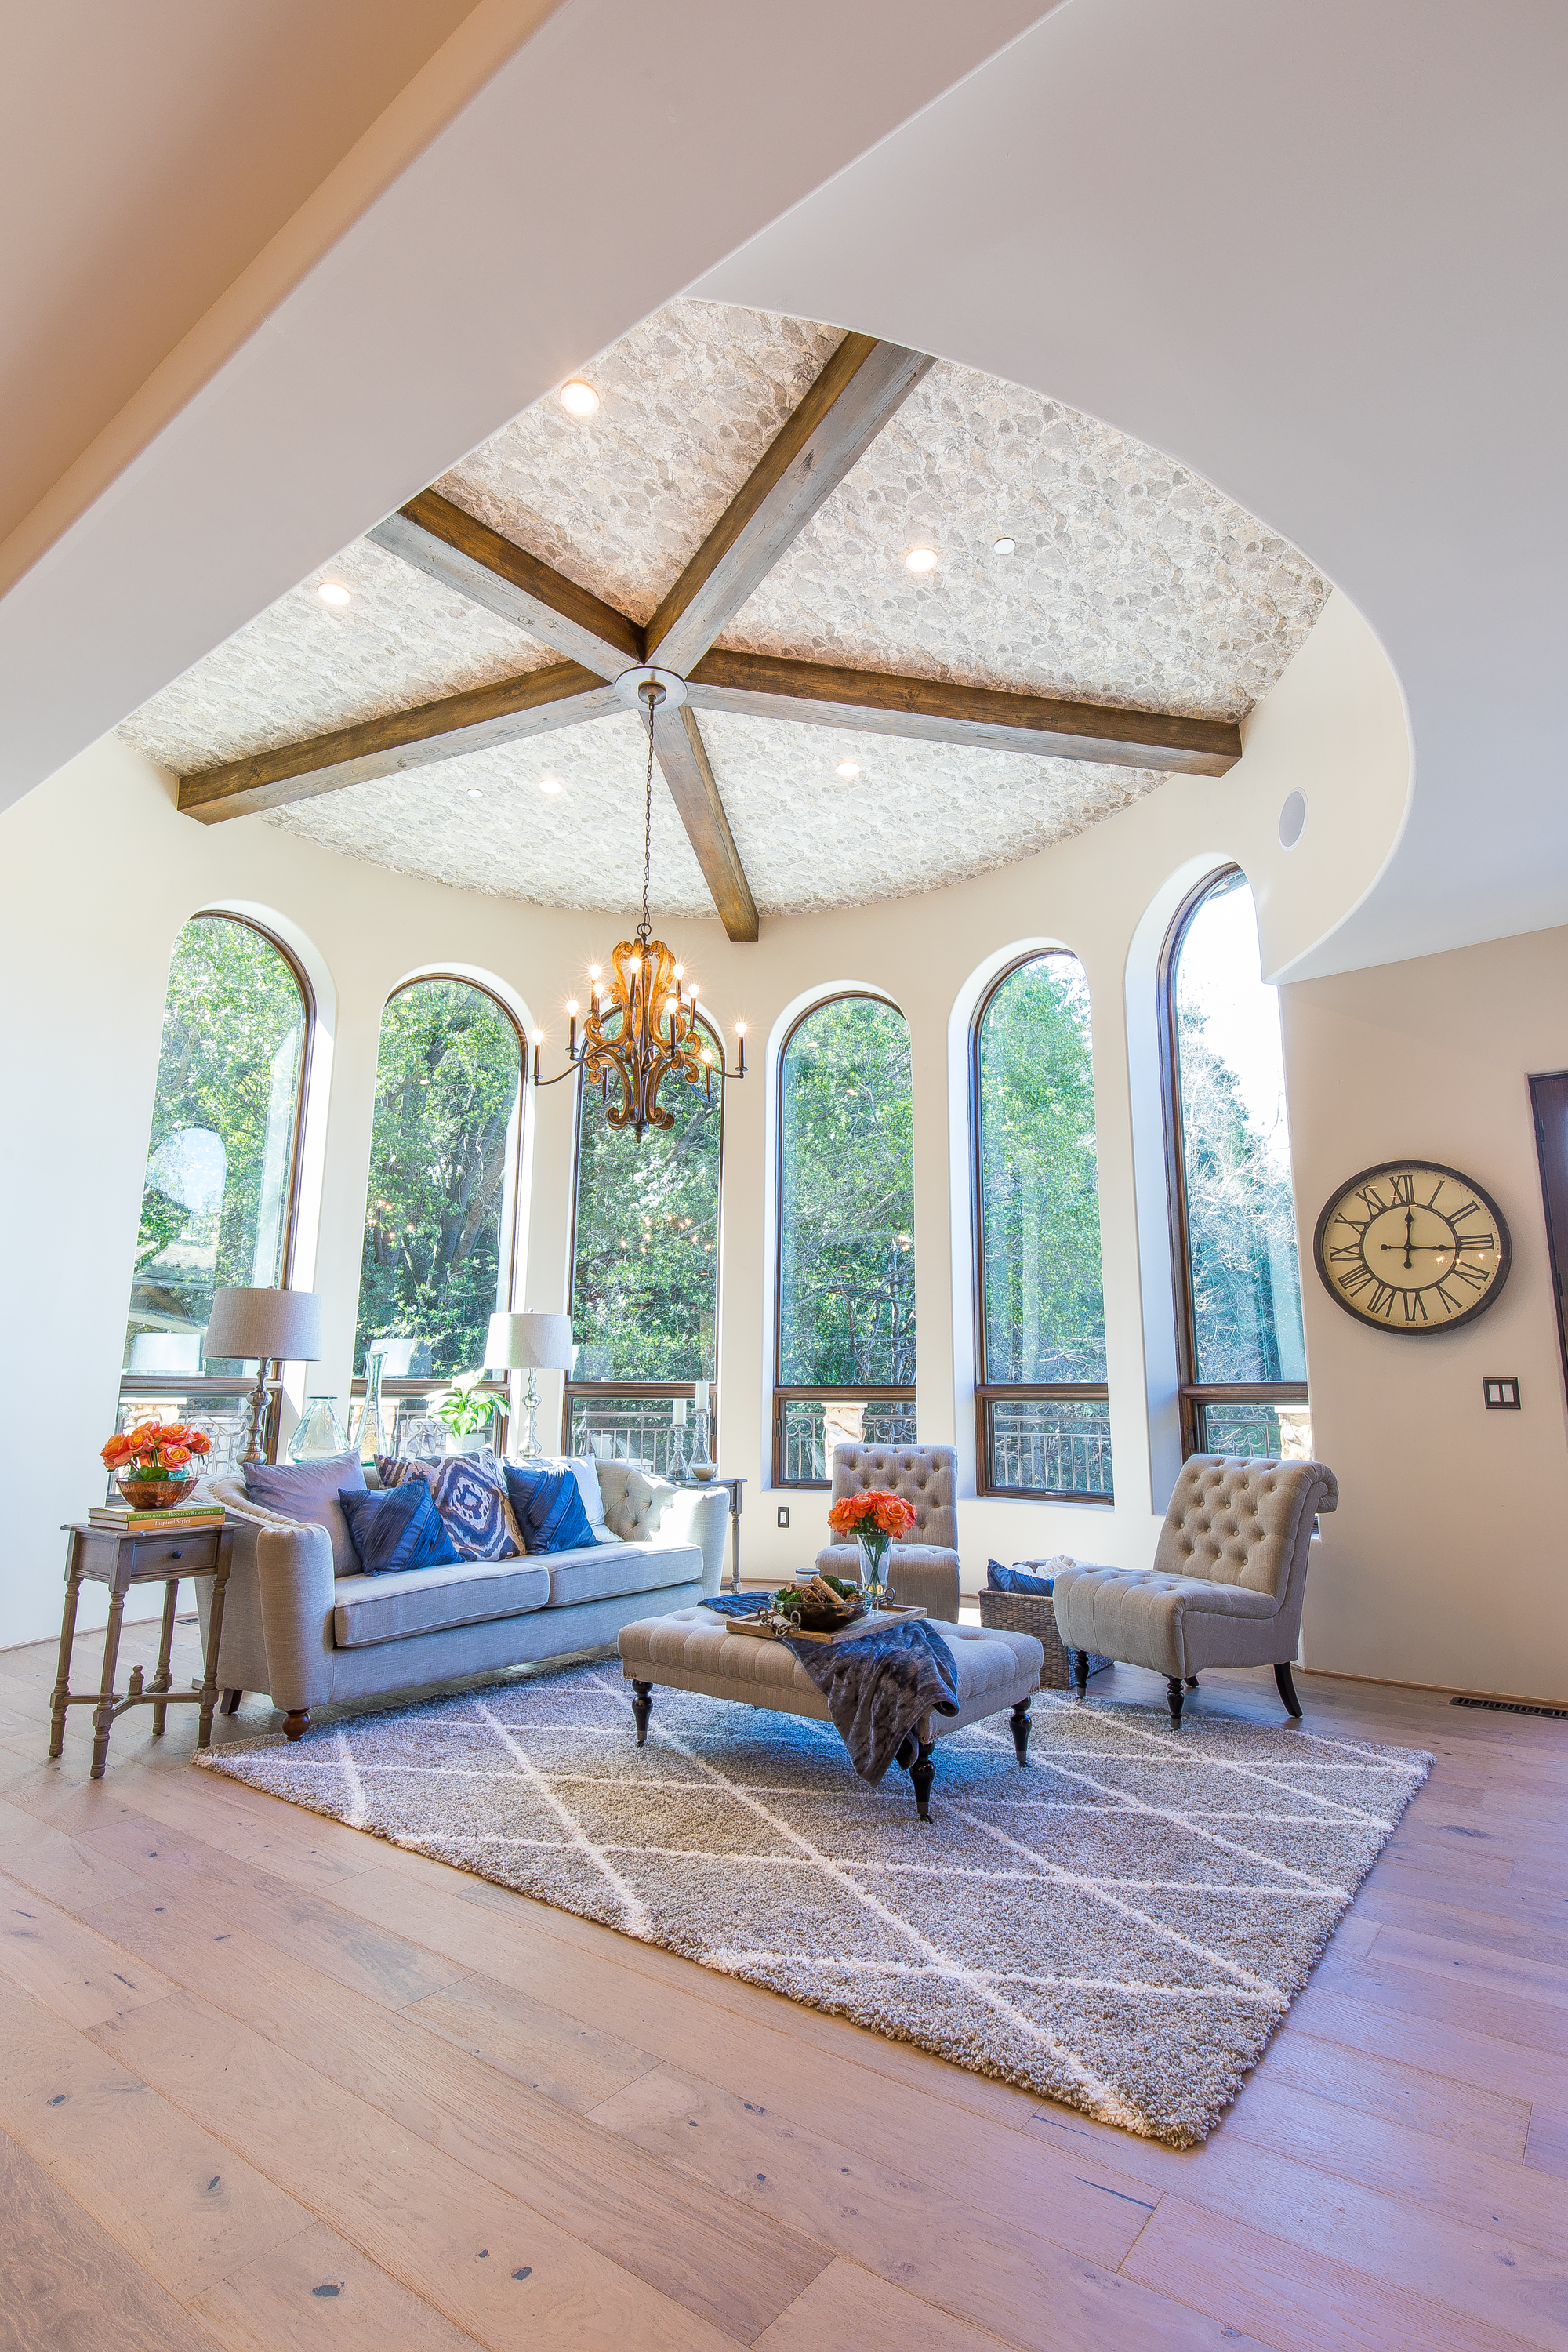  The 14 foot ceiling features hand-distressed and hand-stained exposed beams from which a glorious 12 light candle style renaissance chandelier extends 